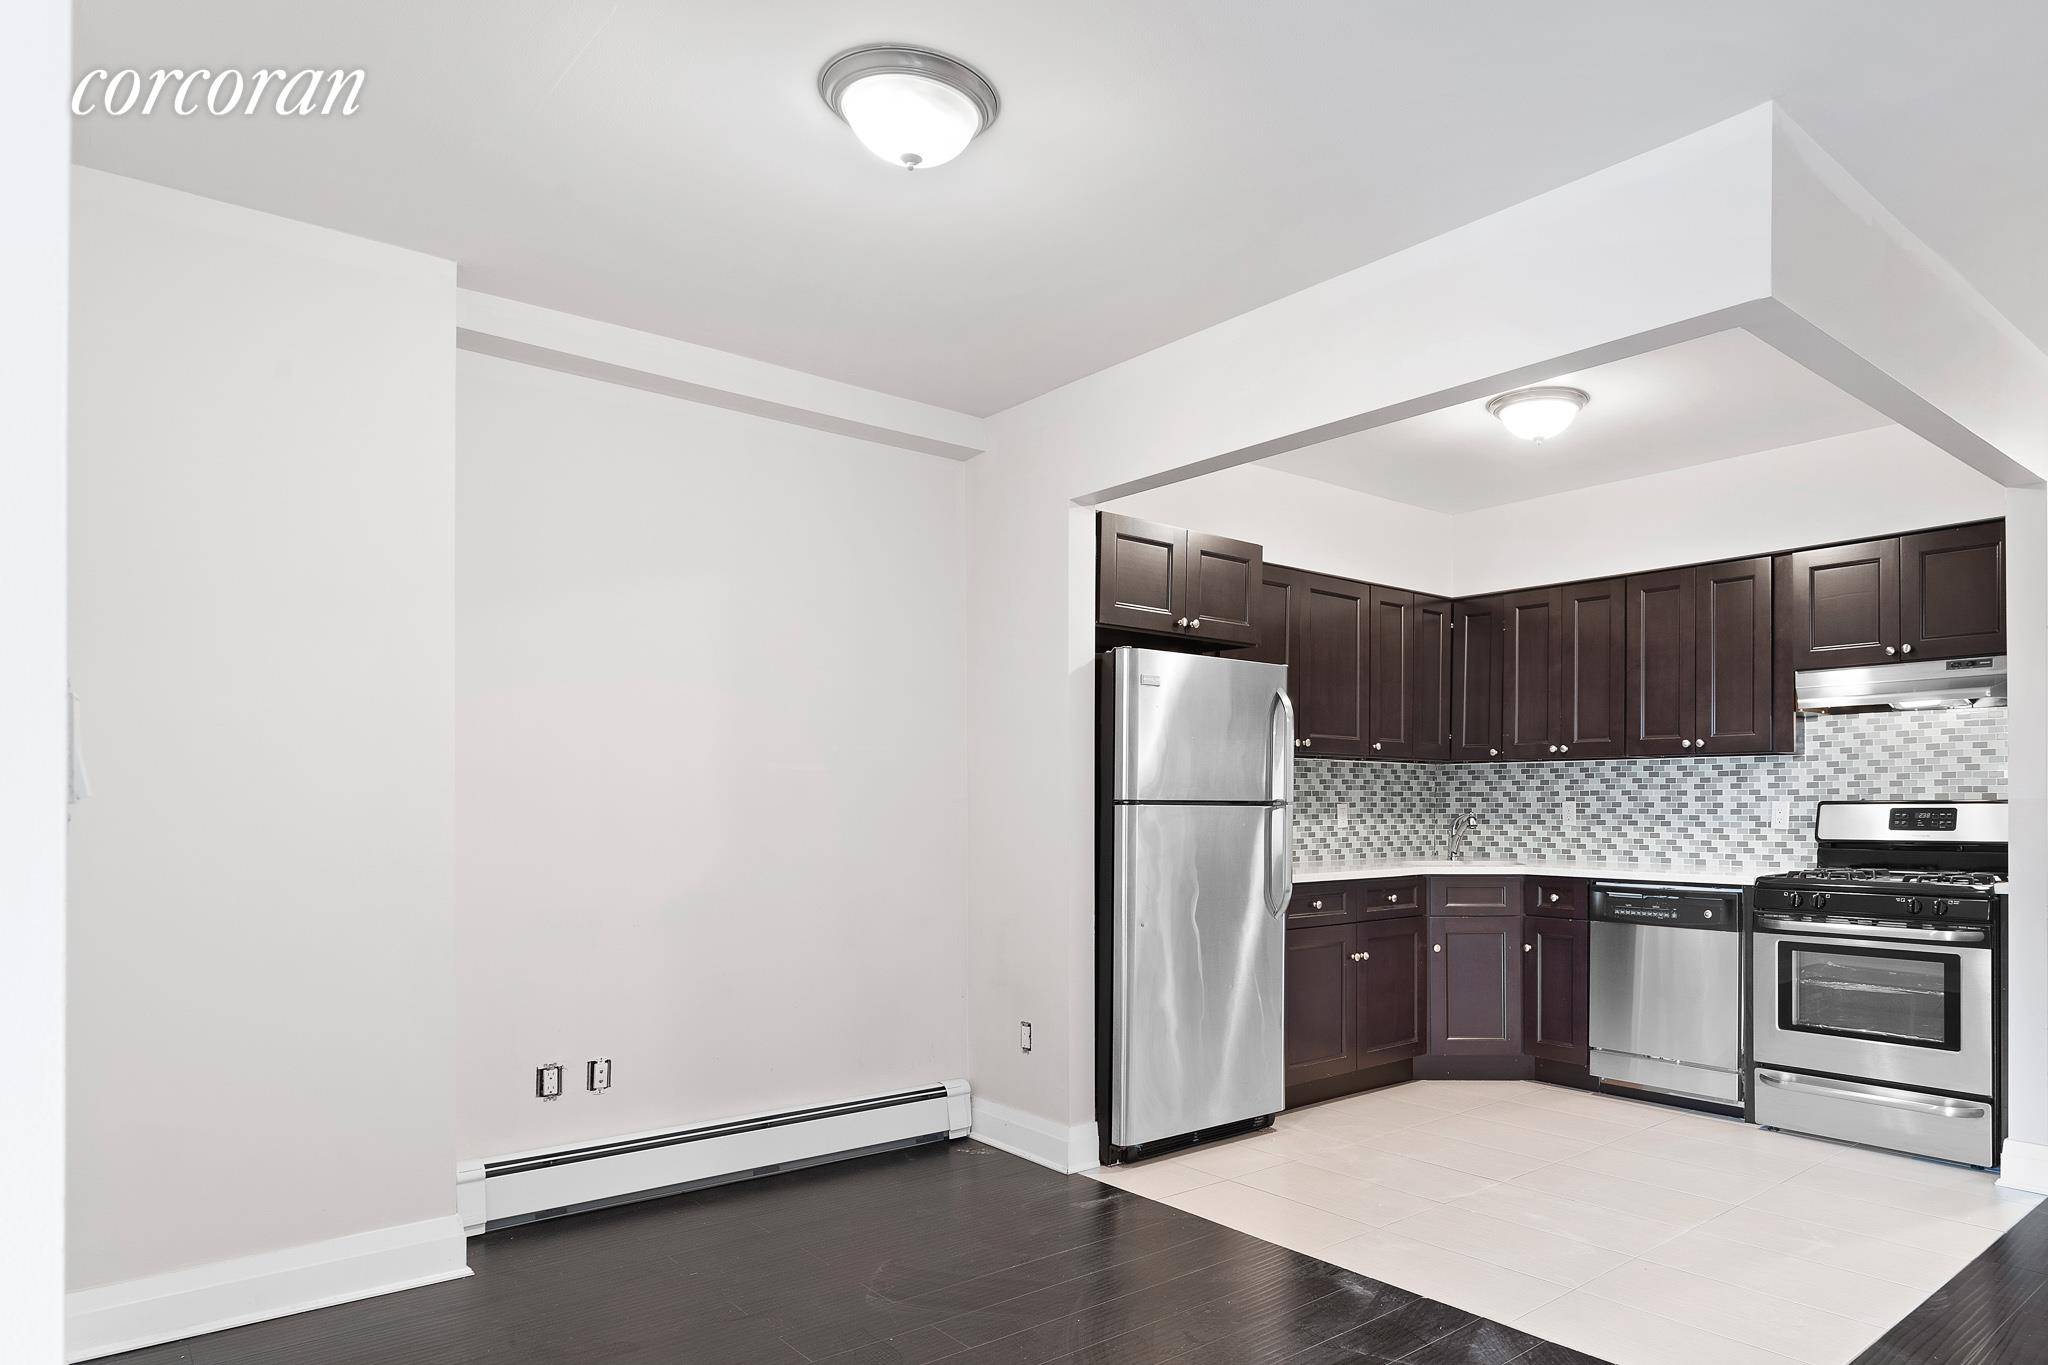 FEATURES 3 Bed 2 Bath Stainless steel kitchen appliances with a quartz countertops along with beautiful Dark wooden cabinetry offering plenty of storage space Every inch of this building is ...